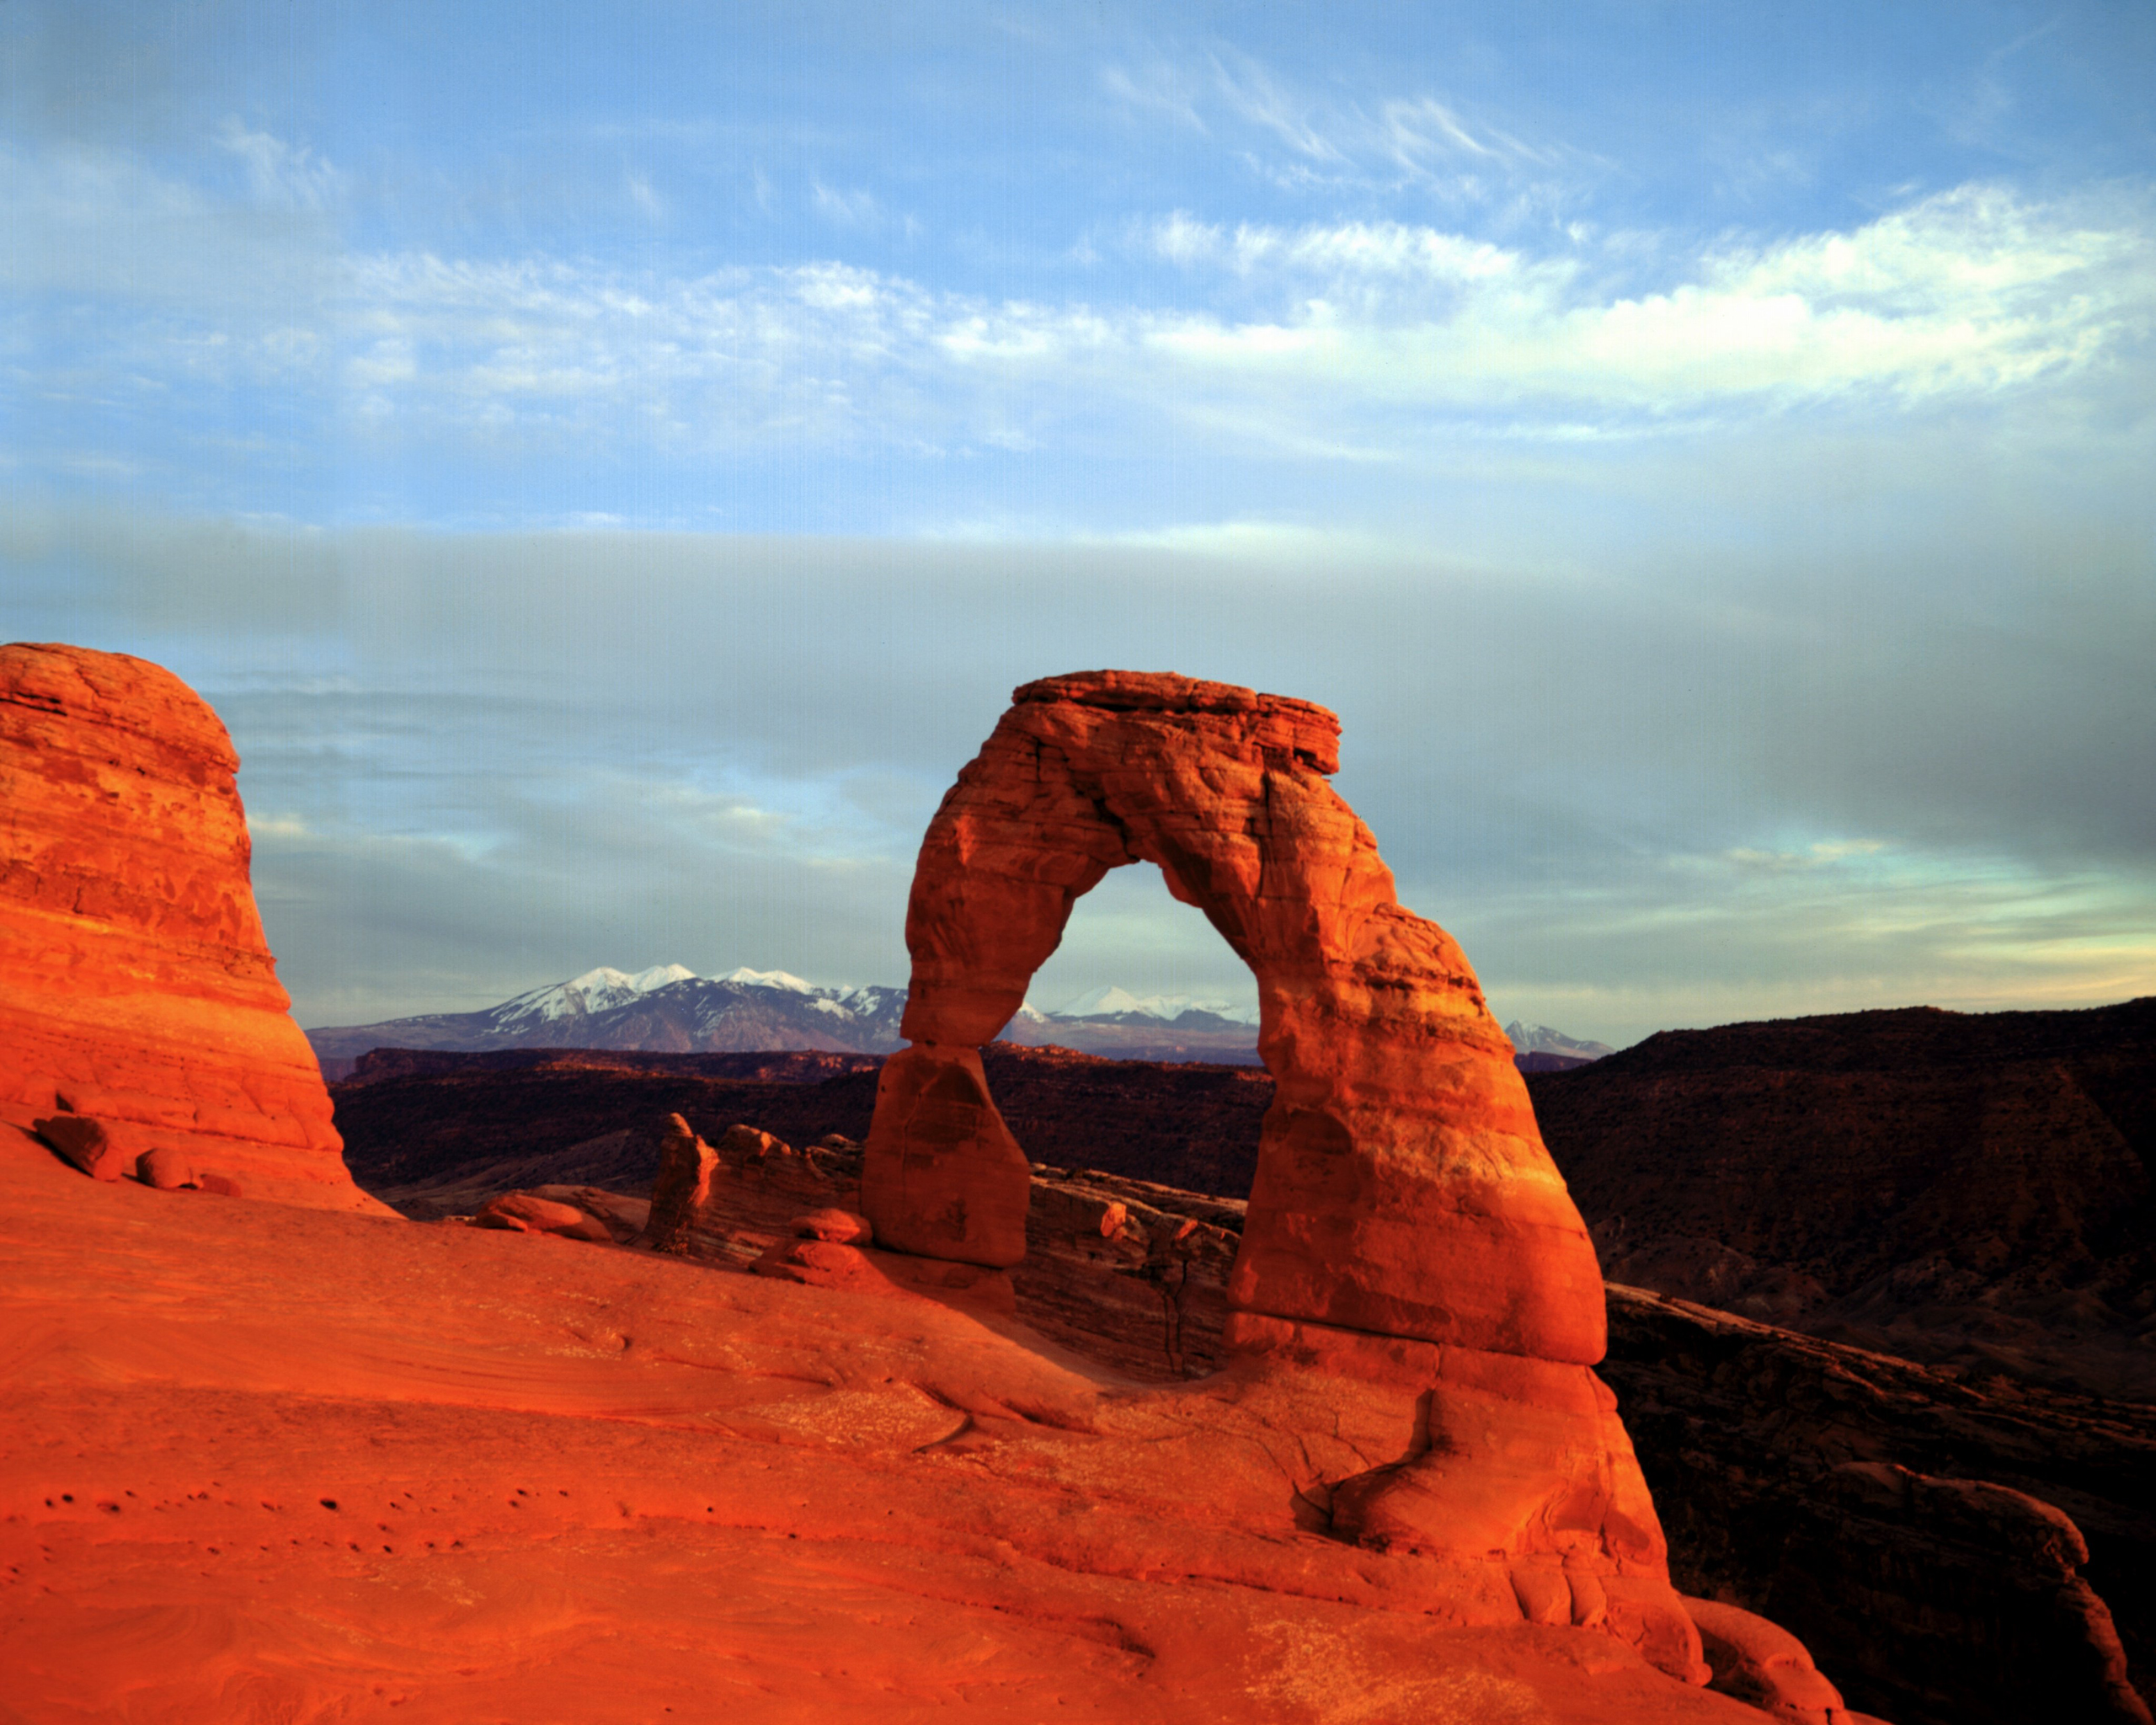 Arches National Park in Utah covers 76,679 acres (Getty Images)